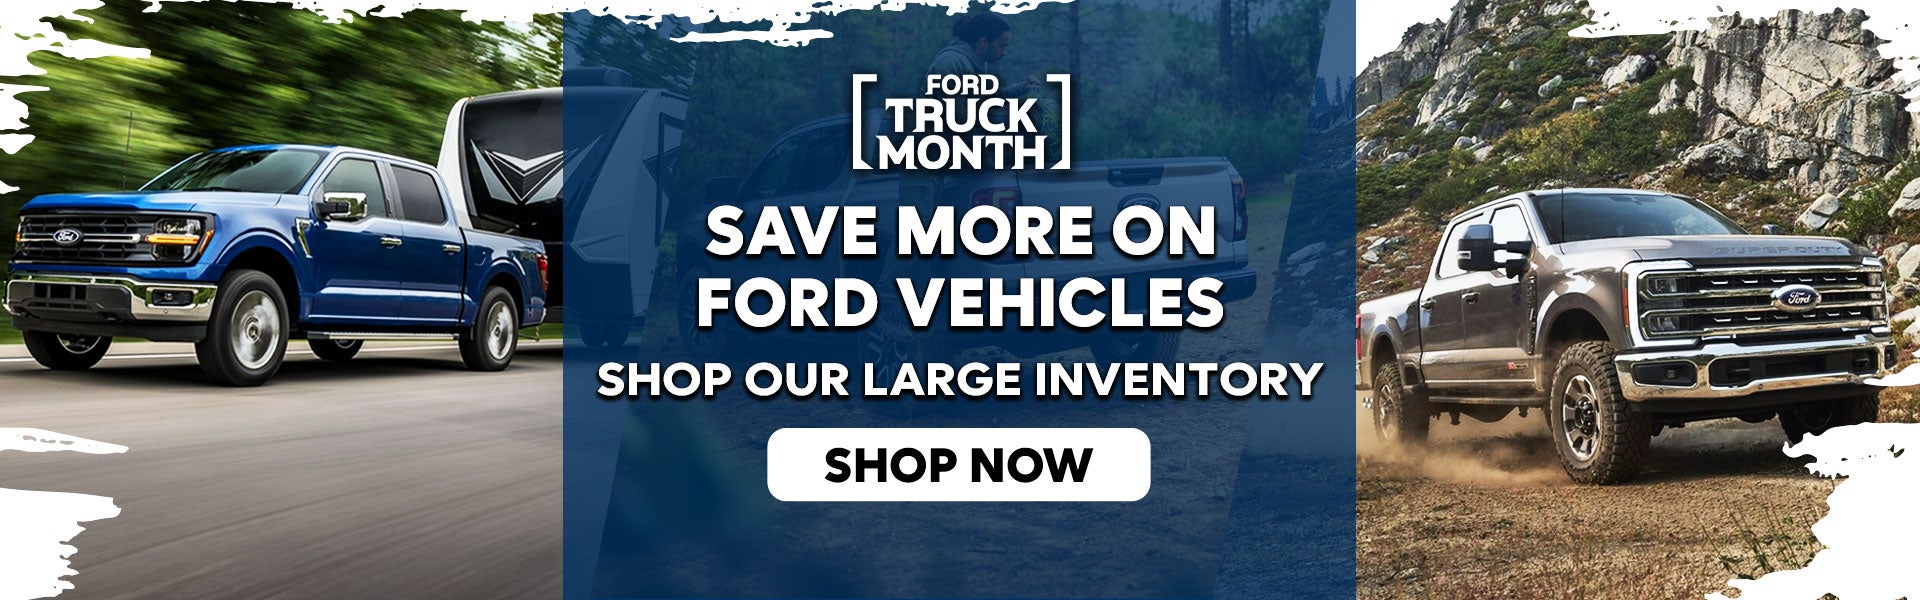 Save More On Ford Vehicles - Shop Our Large Inventory